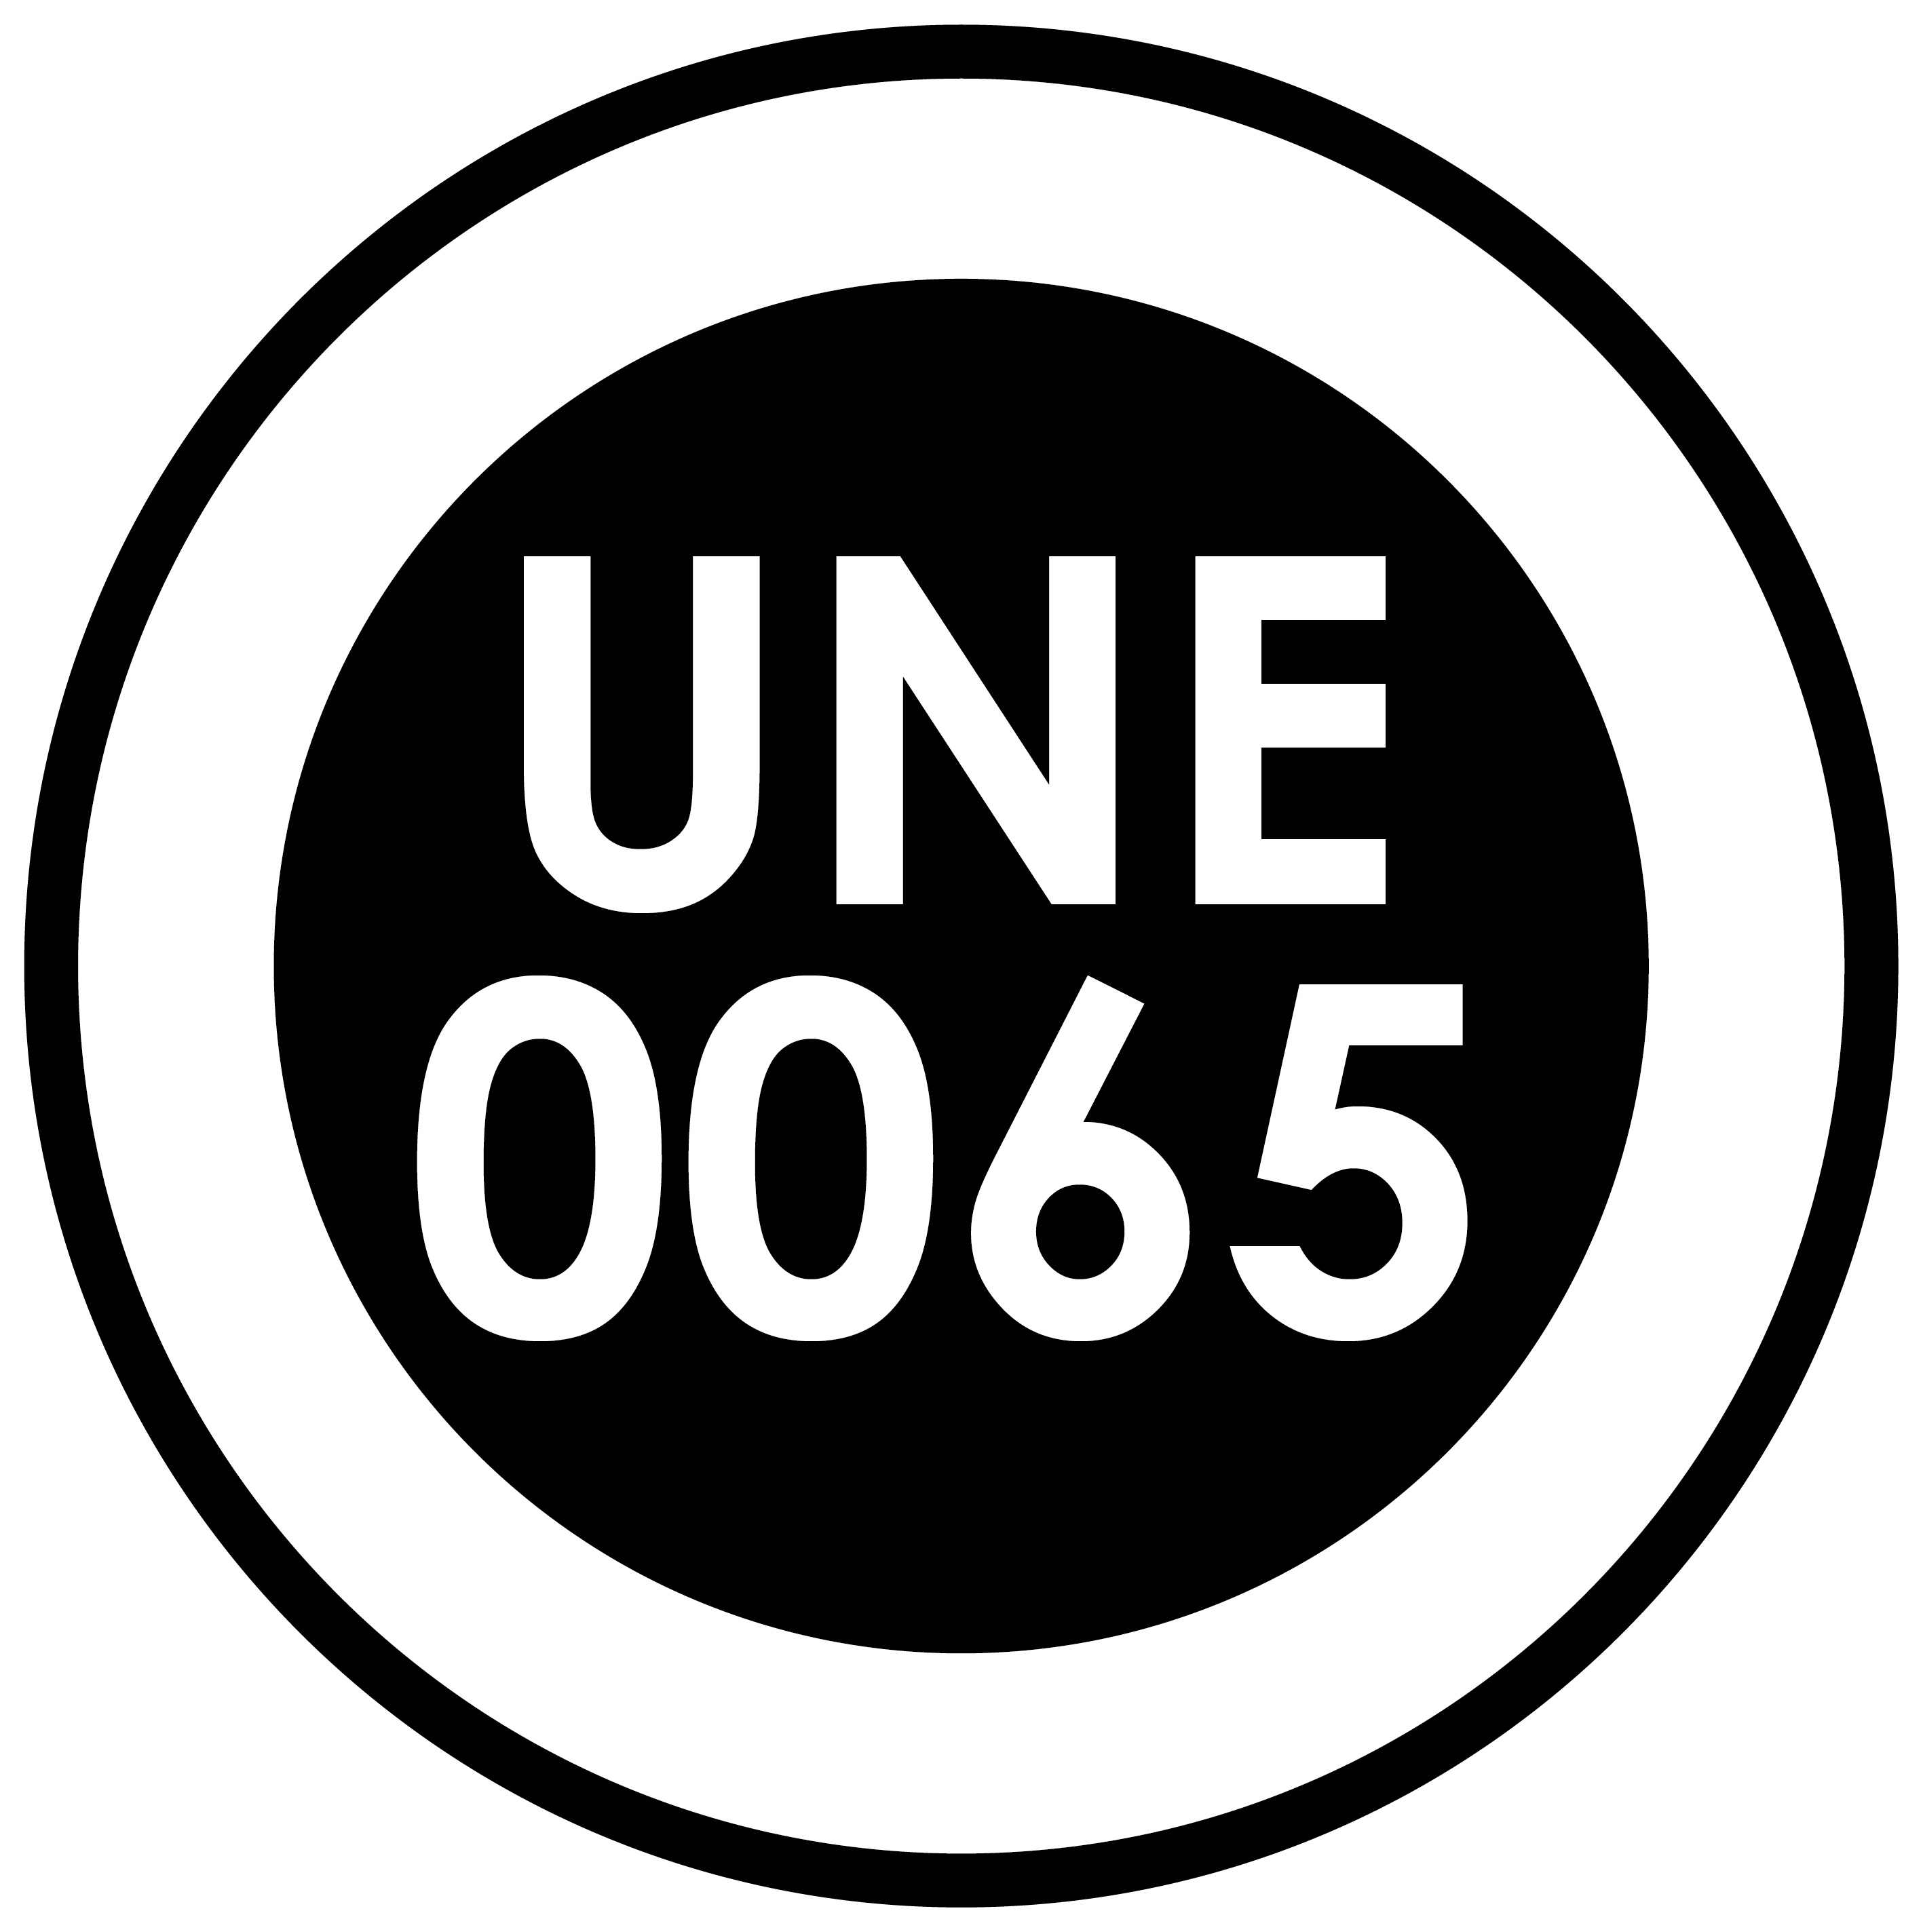 Complies with the UNE0065 / 2020 standard